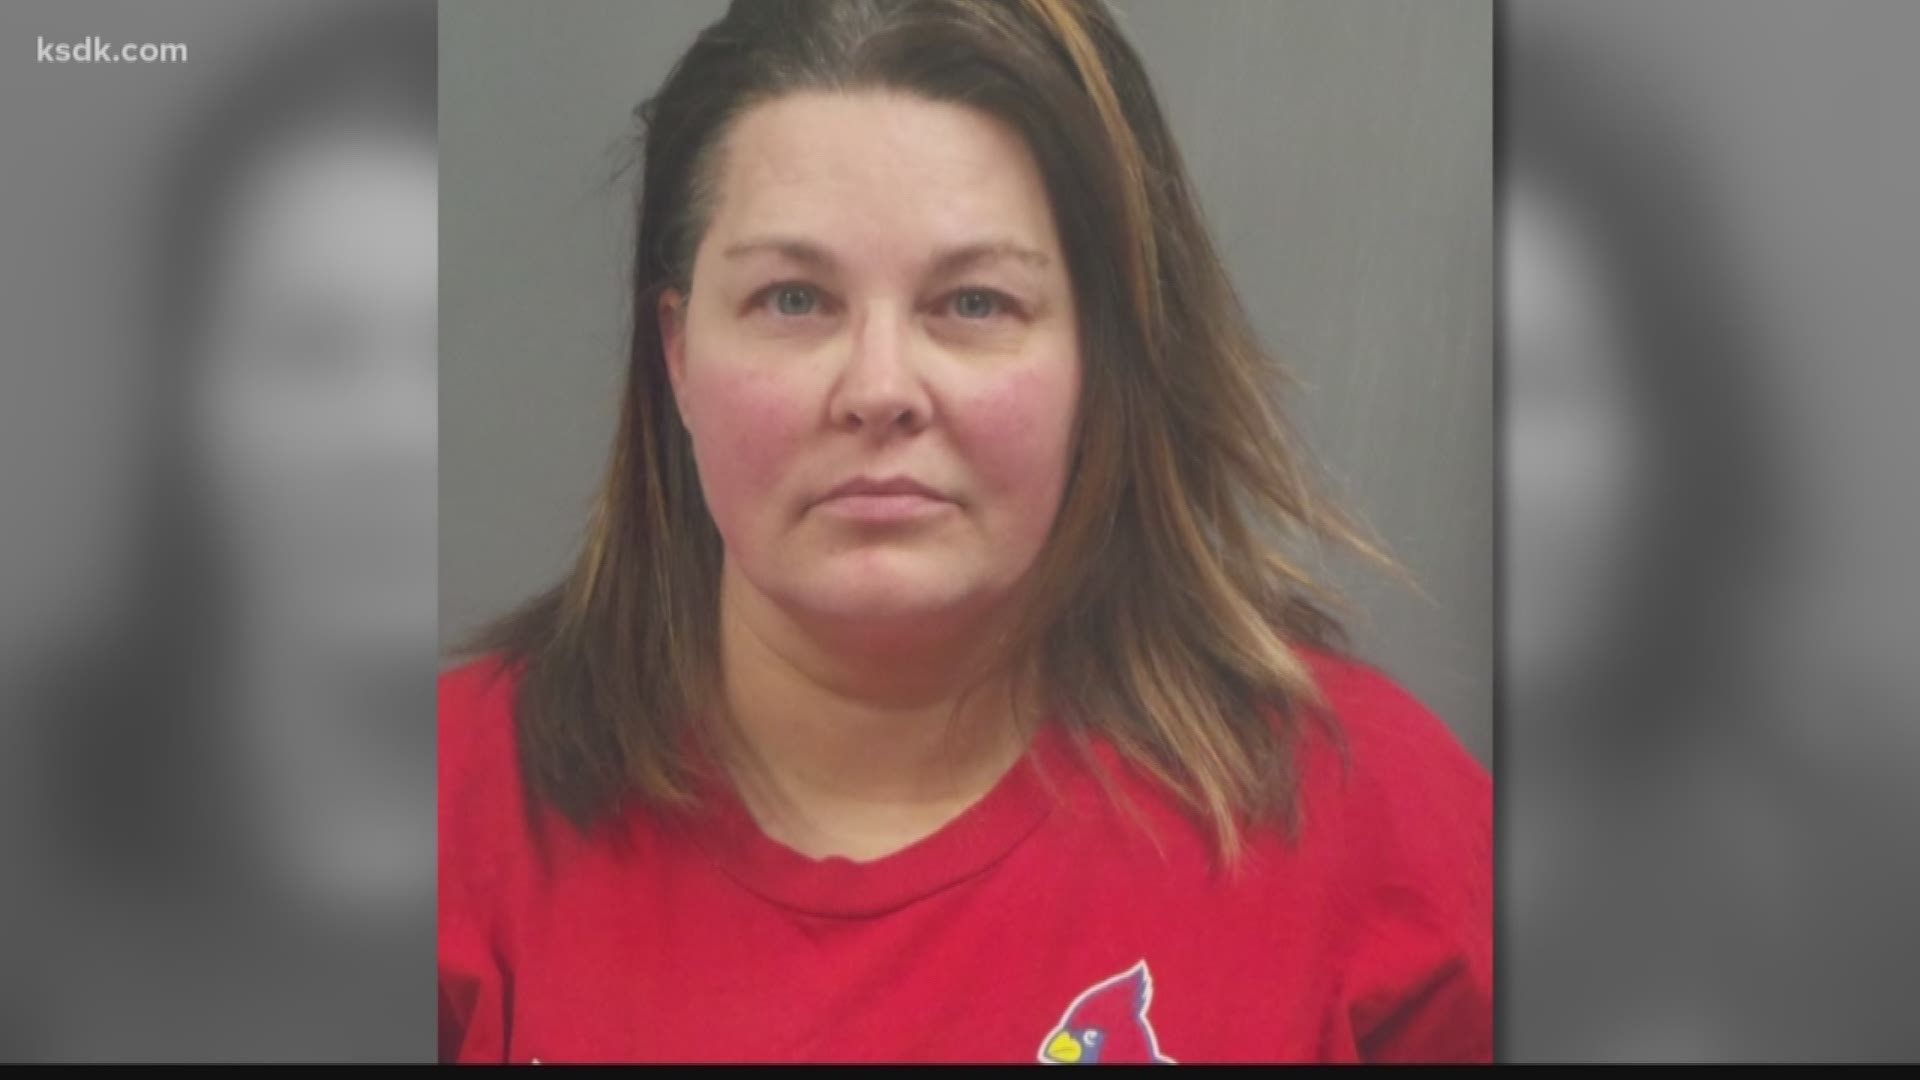 Angela McMunn of Jefferson County is accused of taking "several thousands of dollars" of proceeds intended to help law enforcement, underprivileged kids.